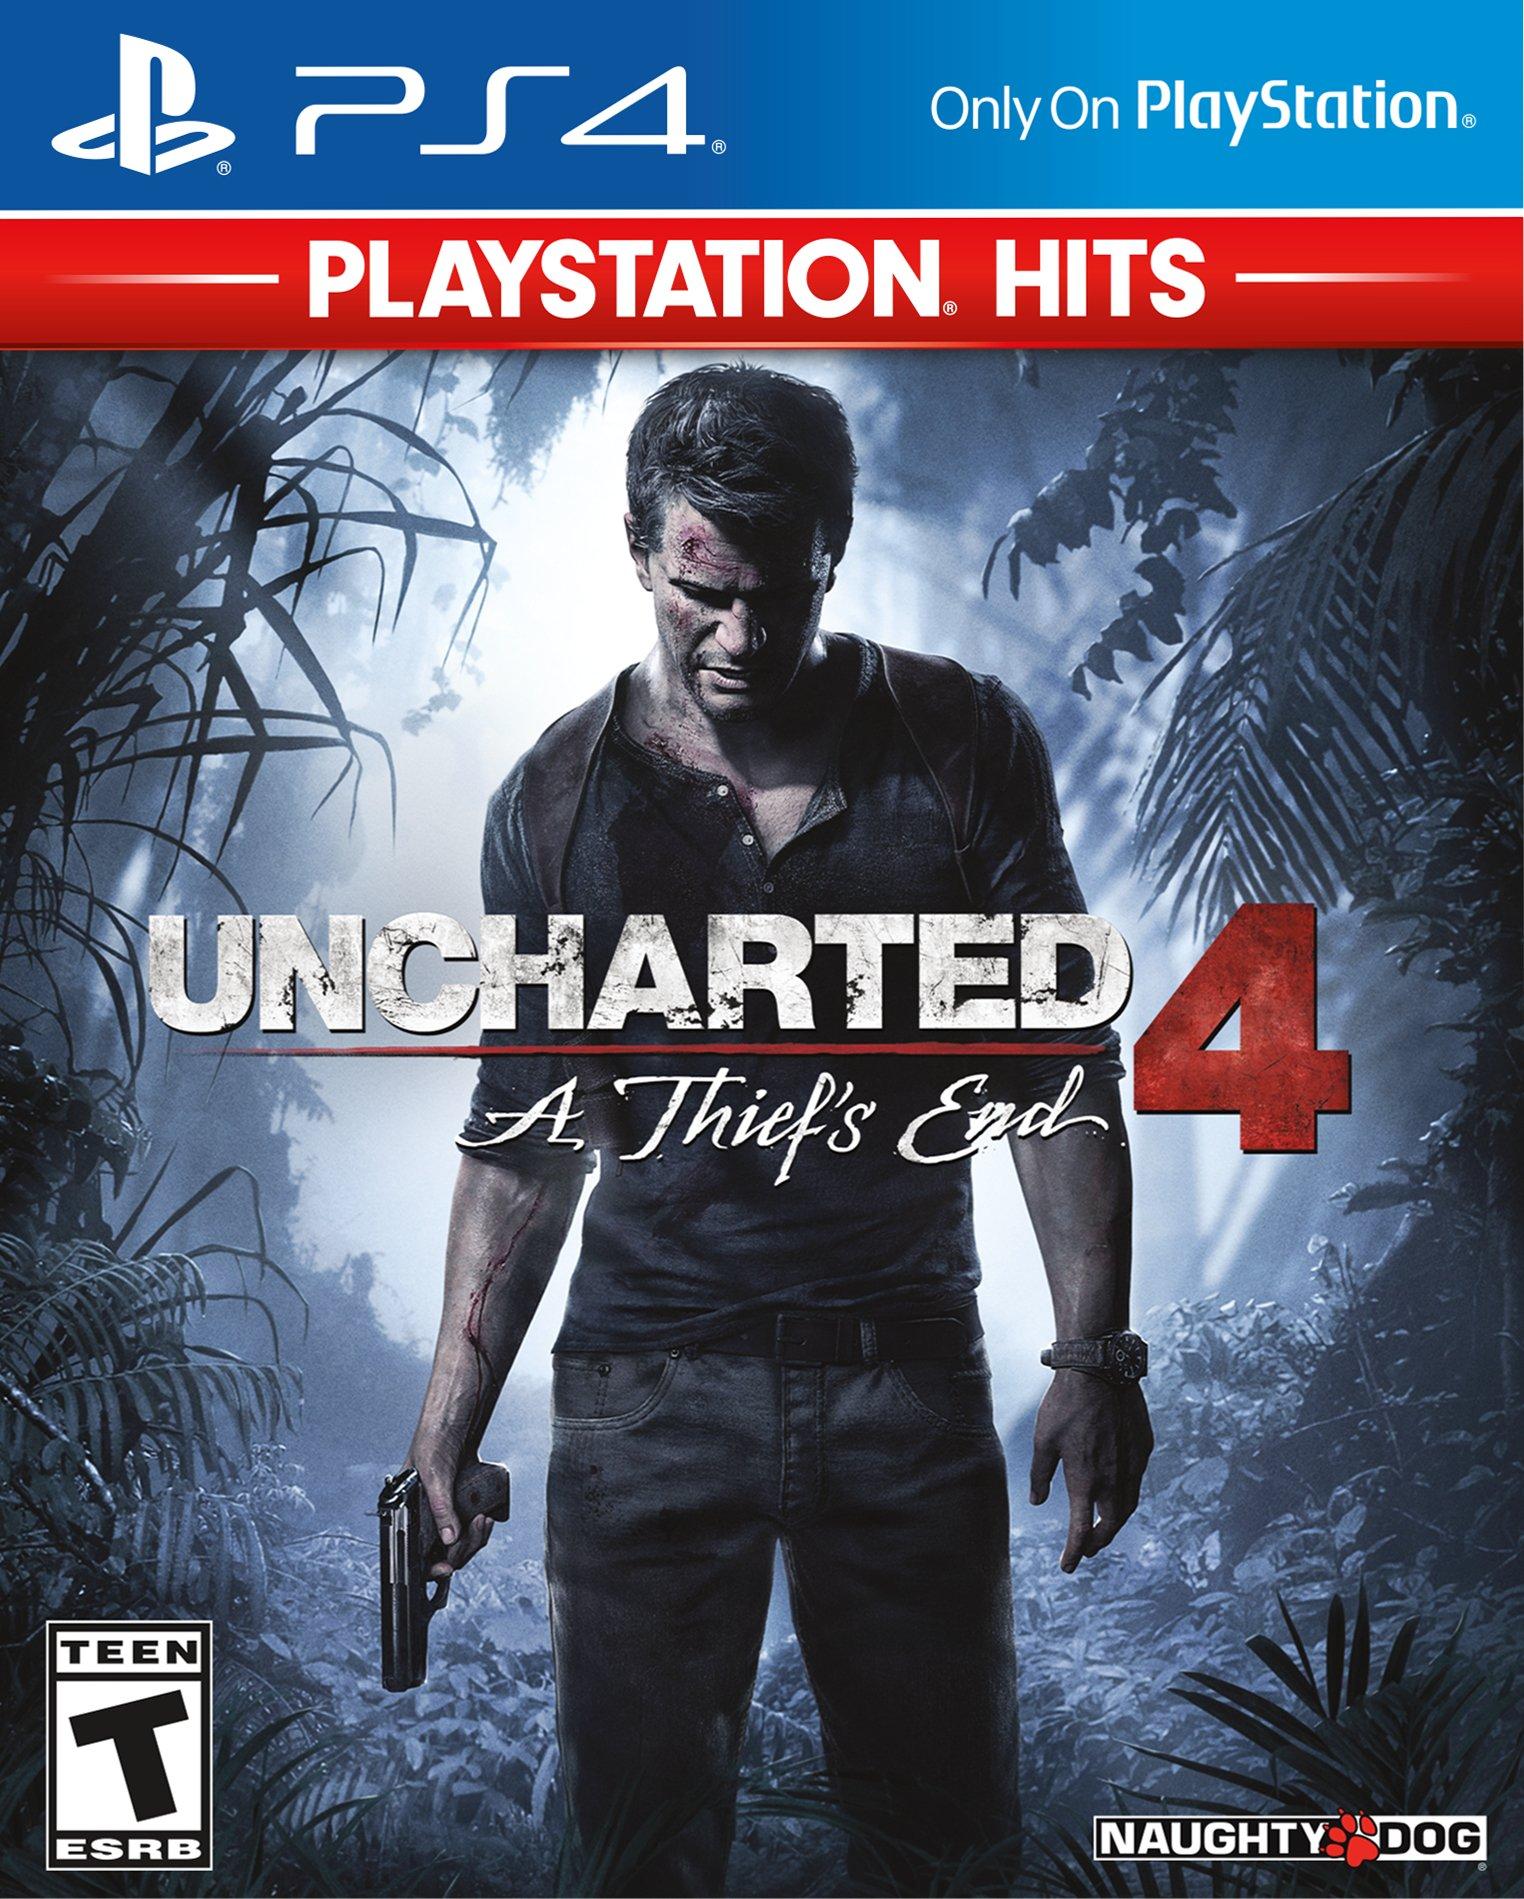 UNCHARTED 4: A Thief's End - PS4 | PlayStation 4 | GameStop